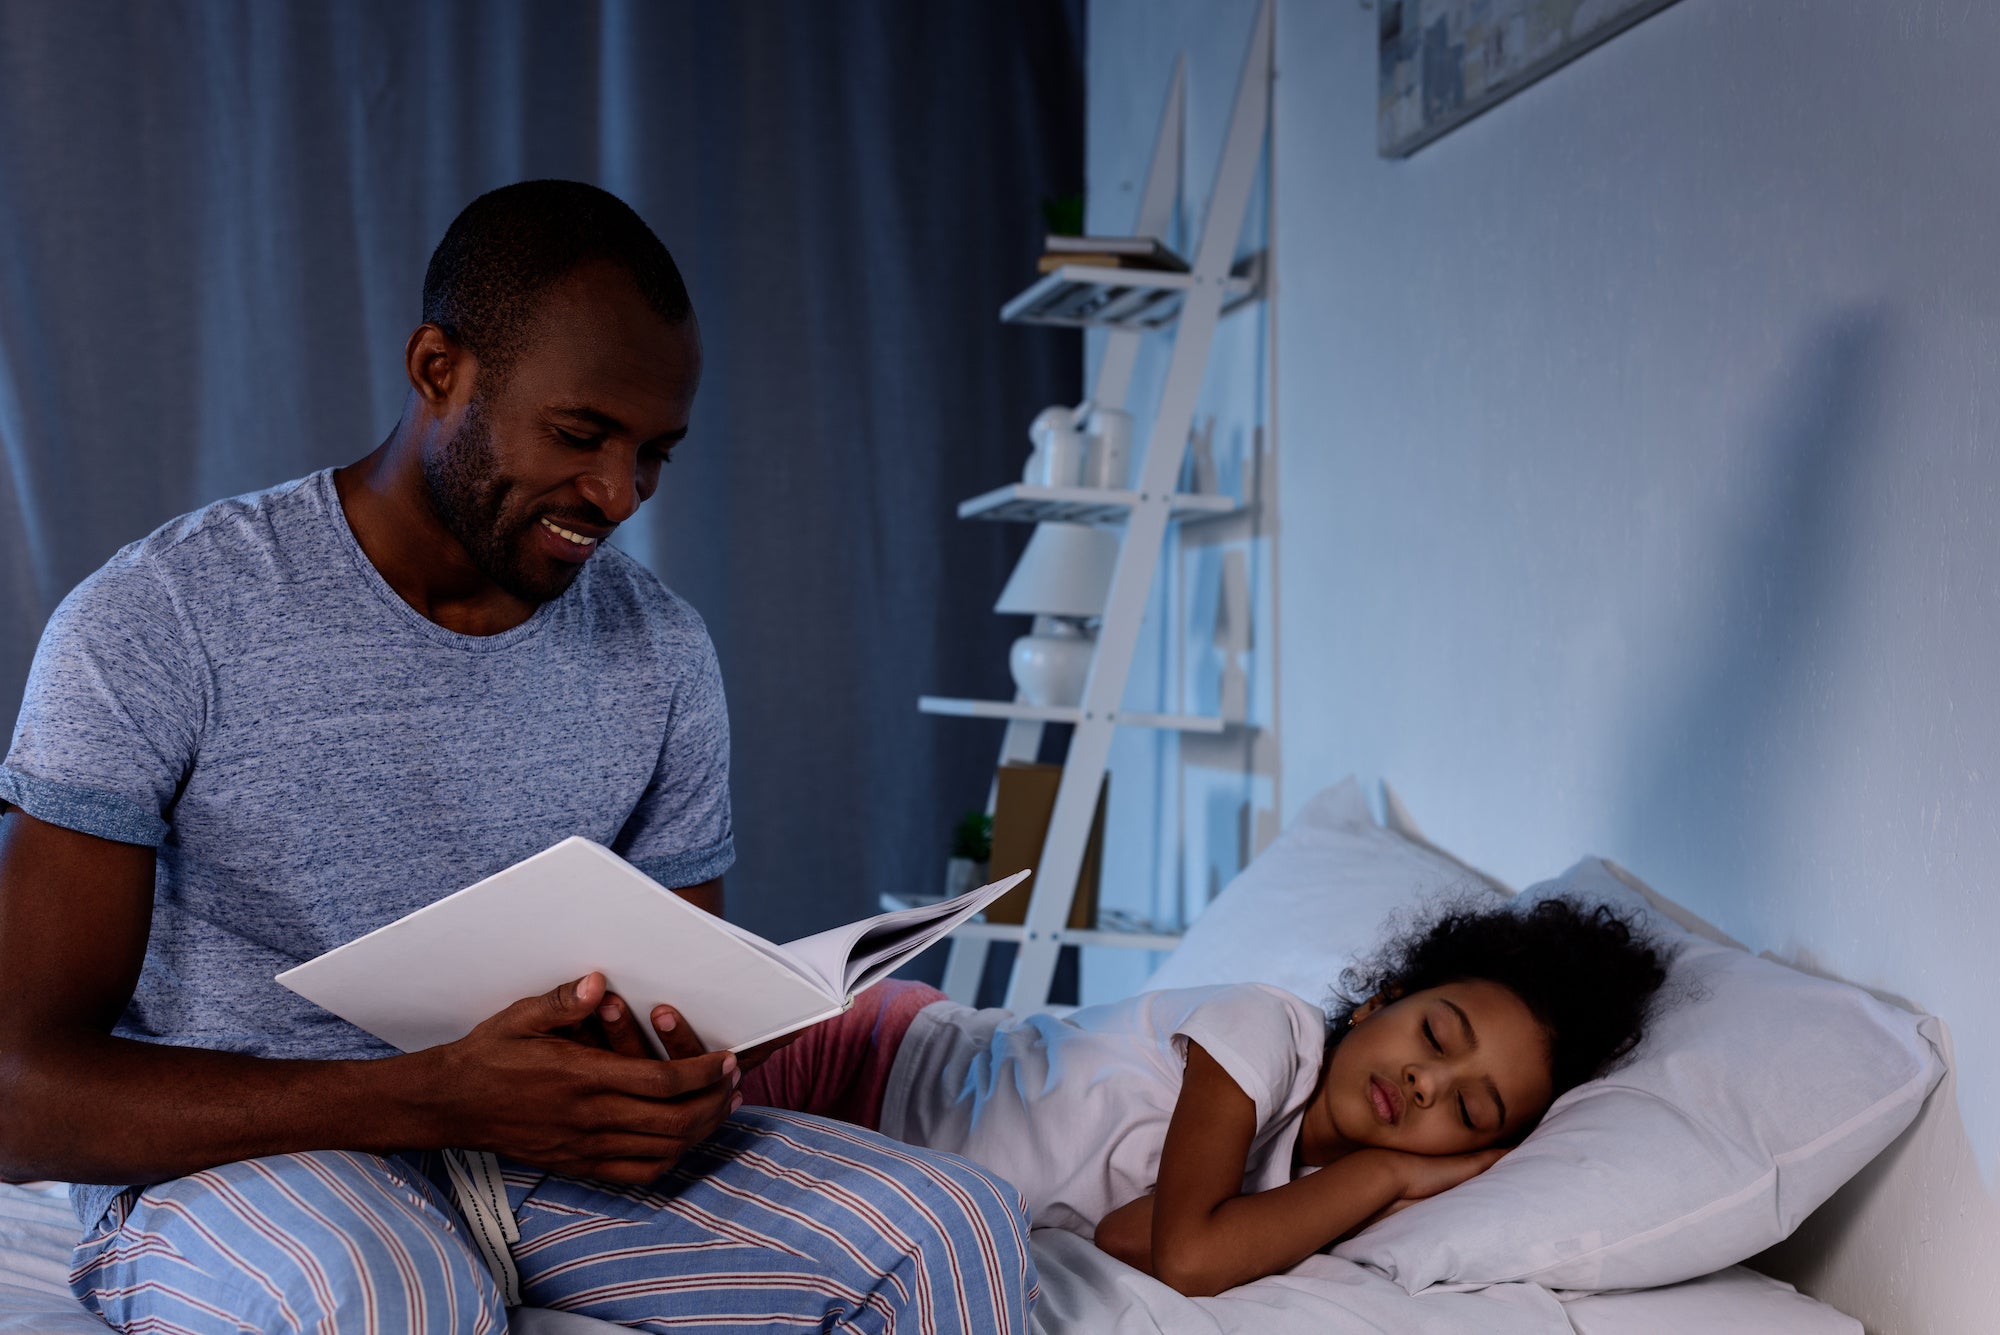 a dad reading to his kid as she falls asleep following a bedtime routine that helps kids sleep.